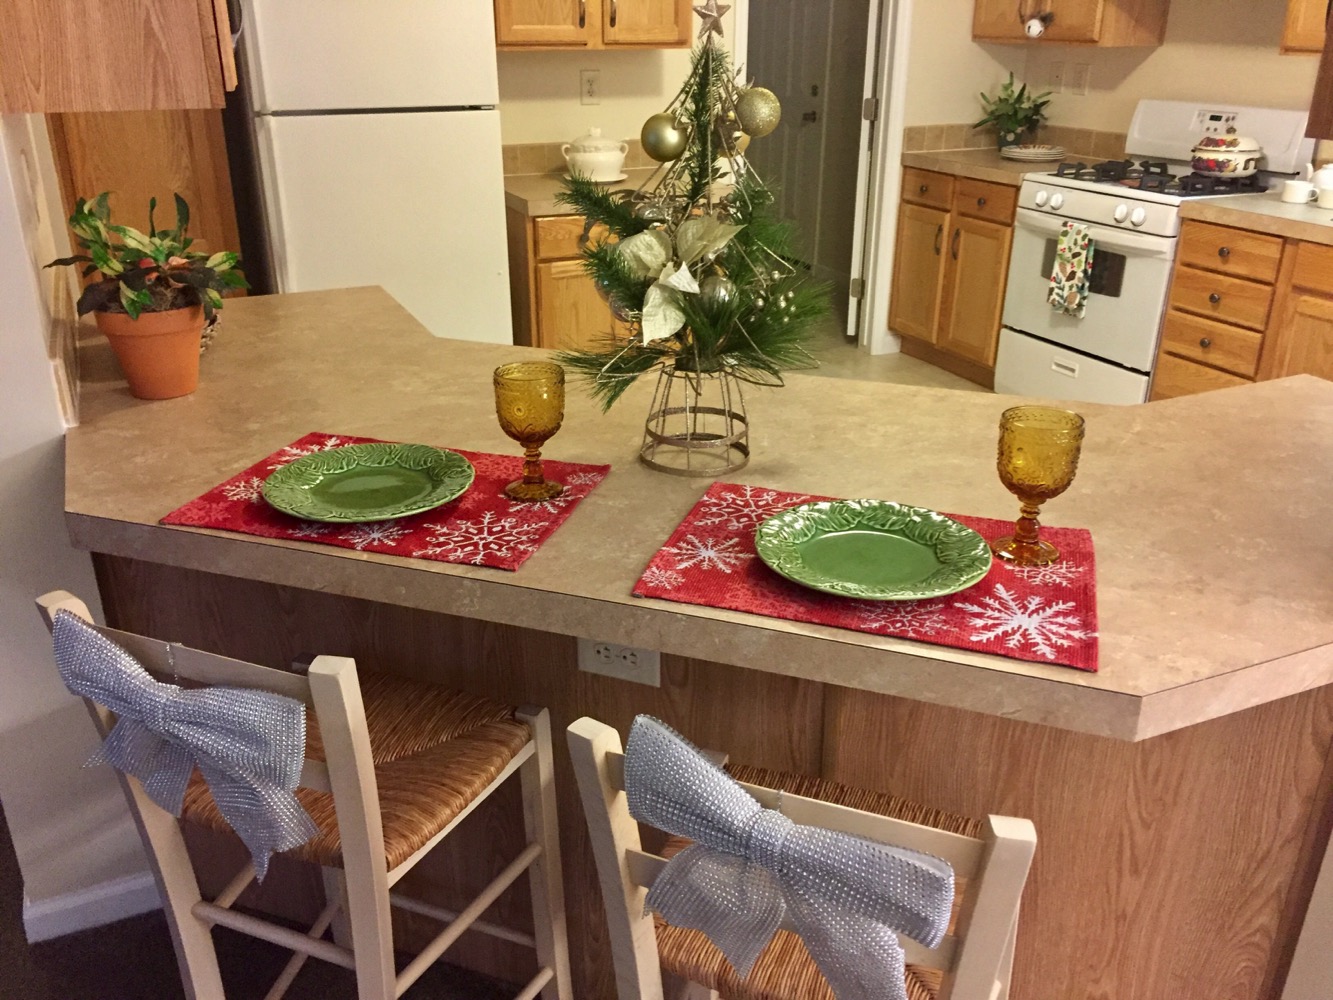 Kitchen Counter Decorated for Christmas